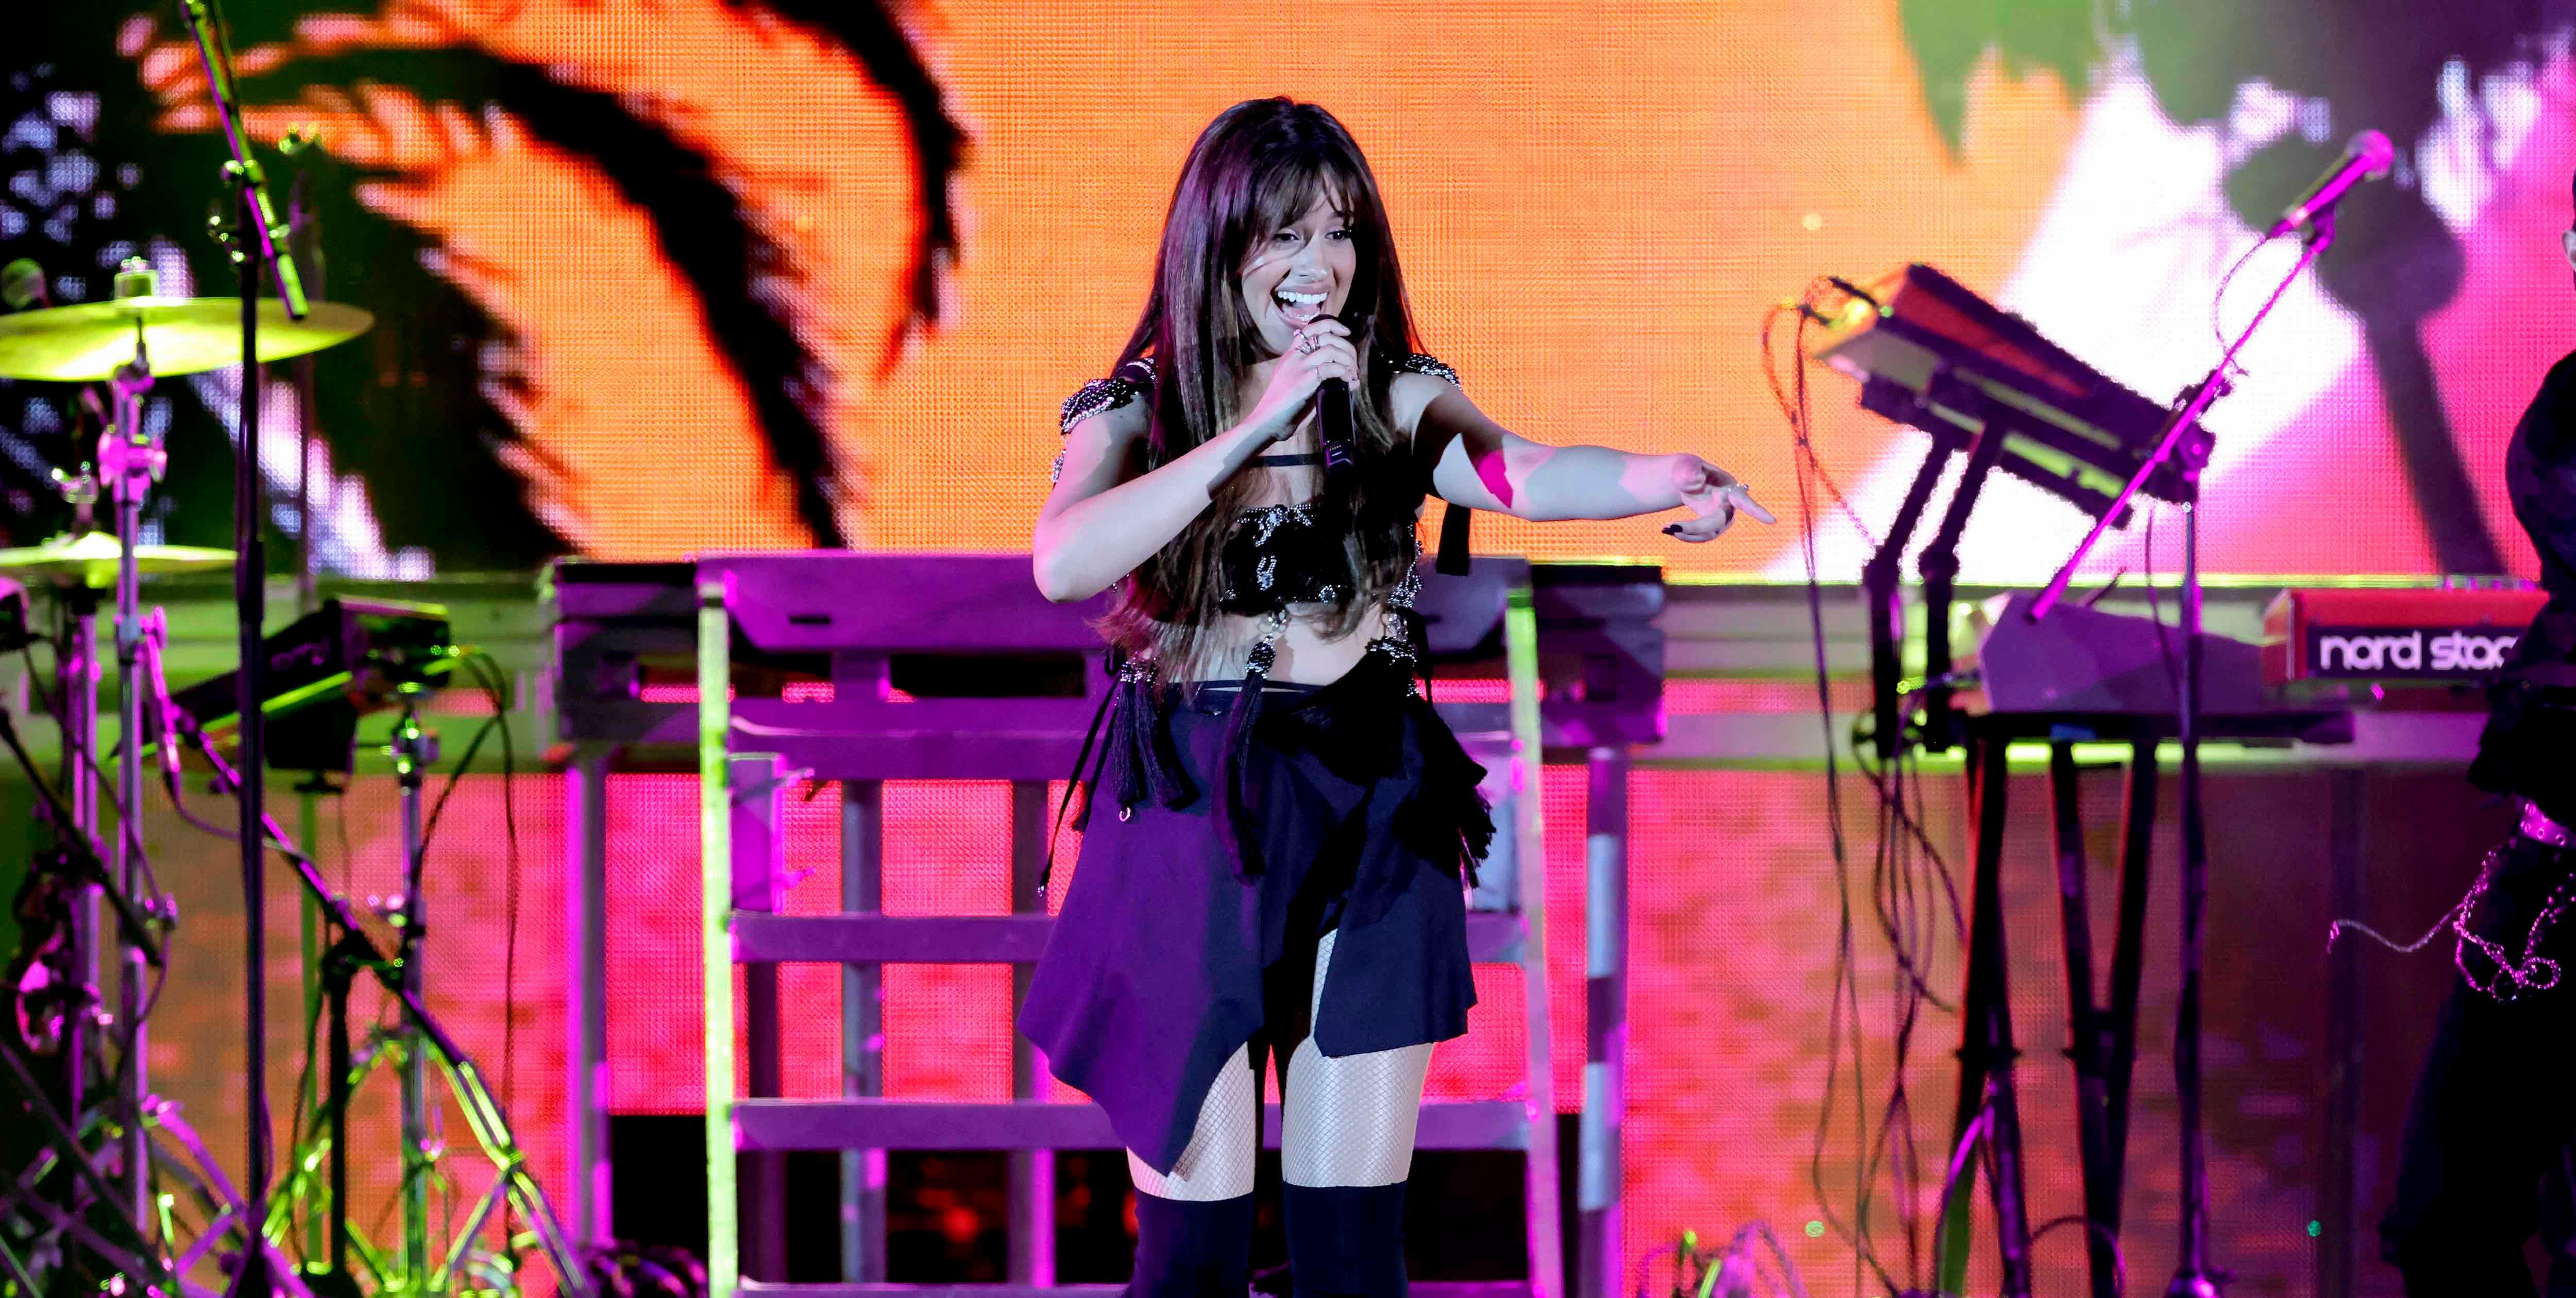 Camila Cabello performs onstage at the 2022 iHeartRadio Wango Tango. Austin Kevitch rumored to be dating Austin Kevitch